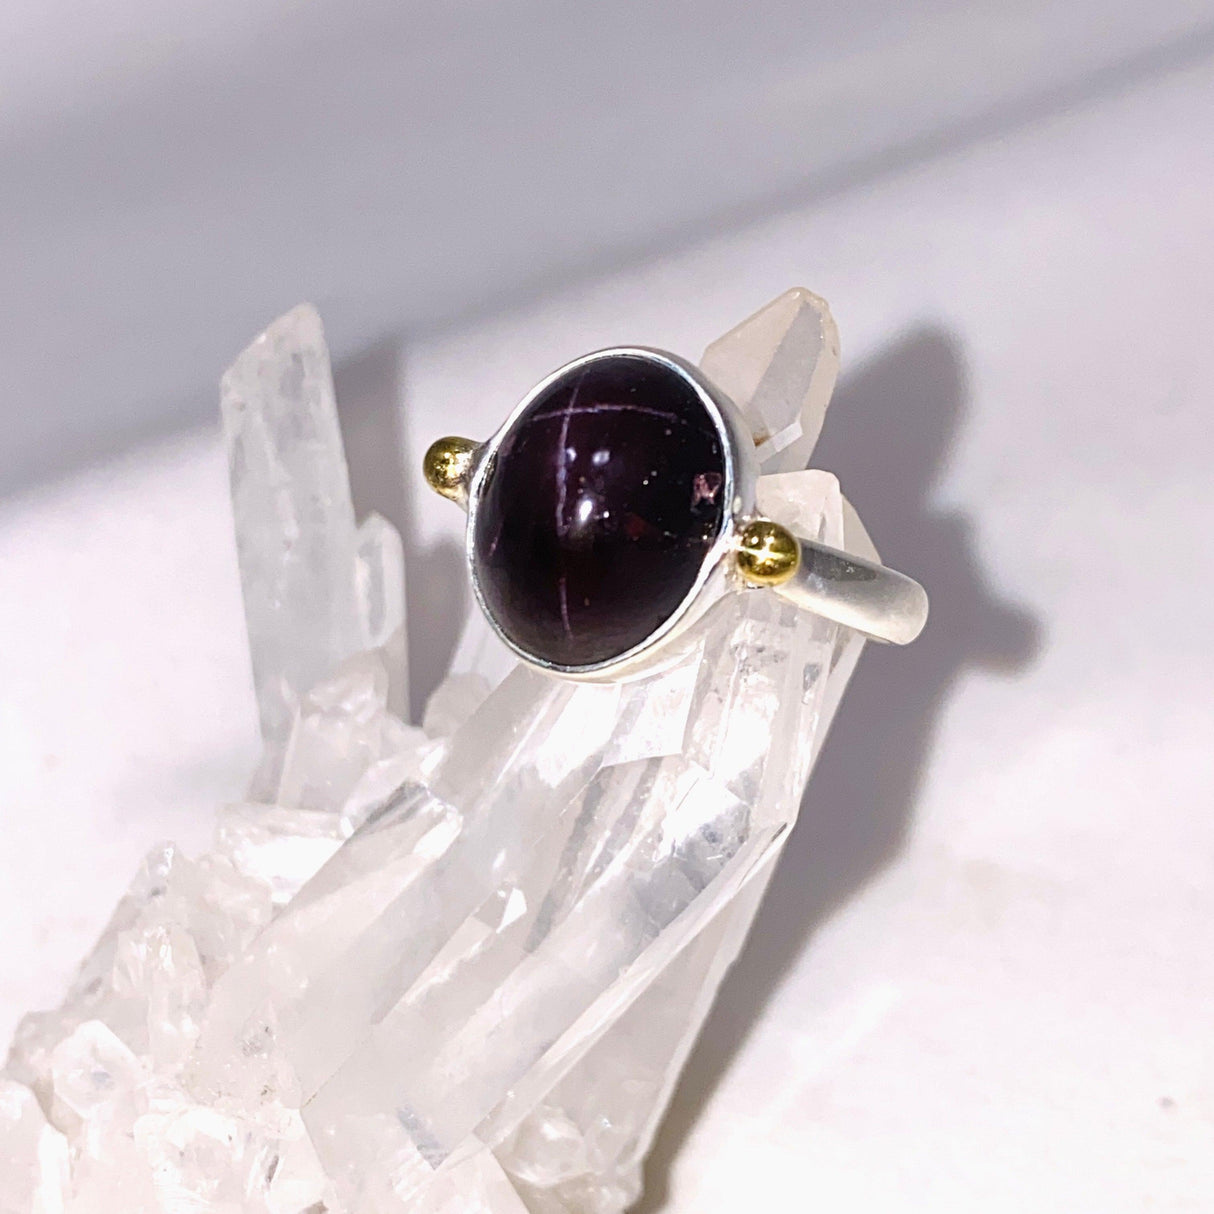 Star Garnet Oval Ring with Brass Detailing Size 9 KRGJ3138 - Nature's Magick